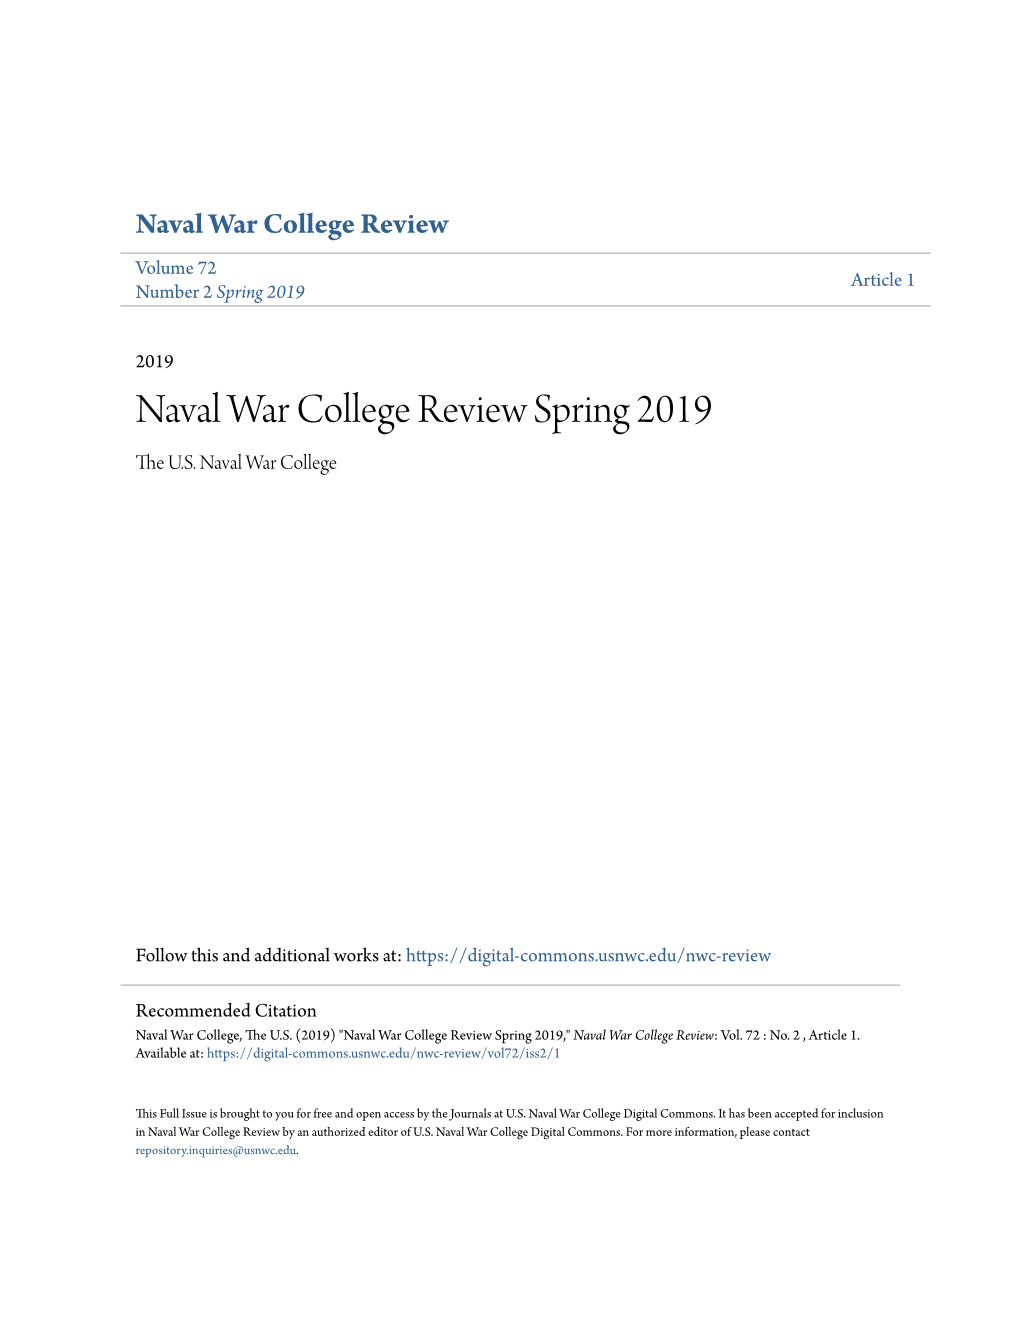 Naval War College Review Spring 2019 the .SU